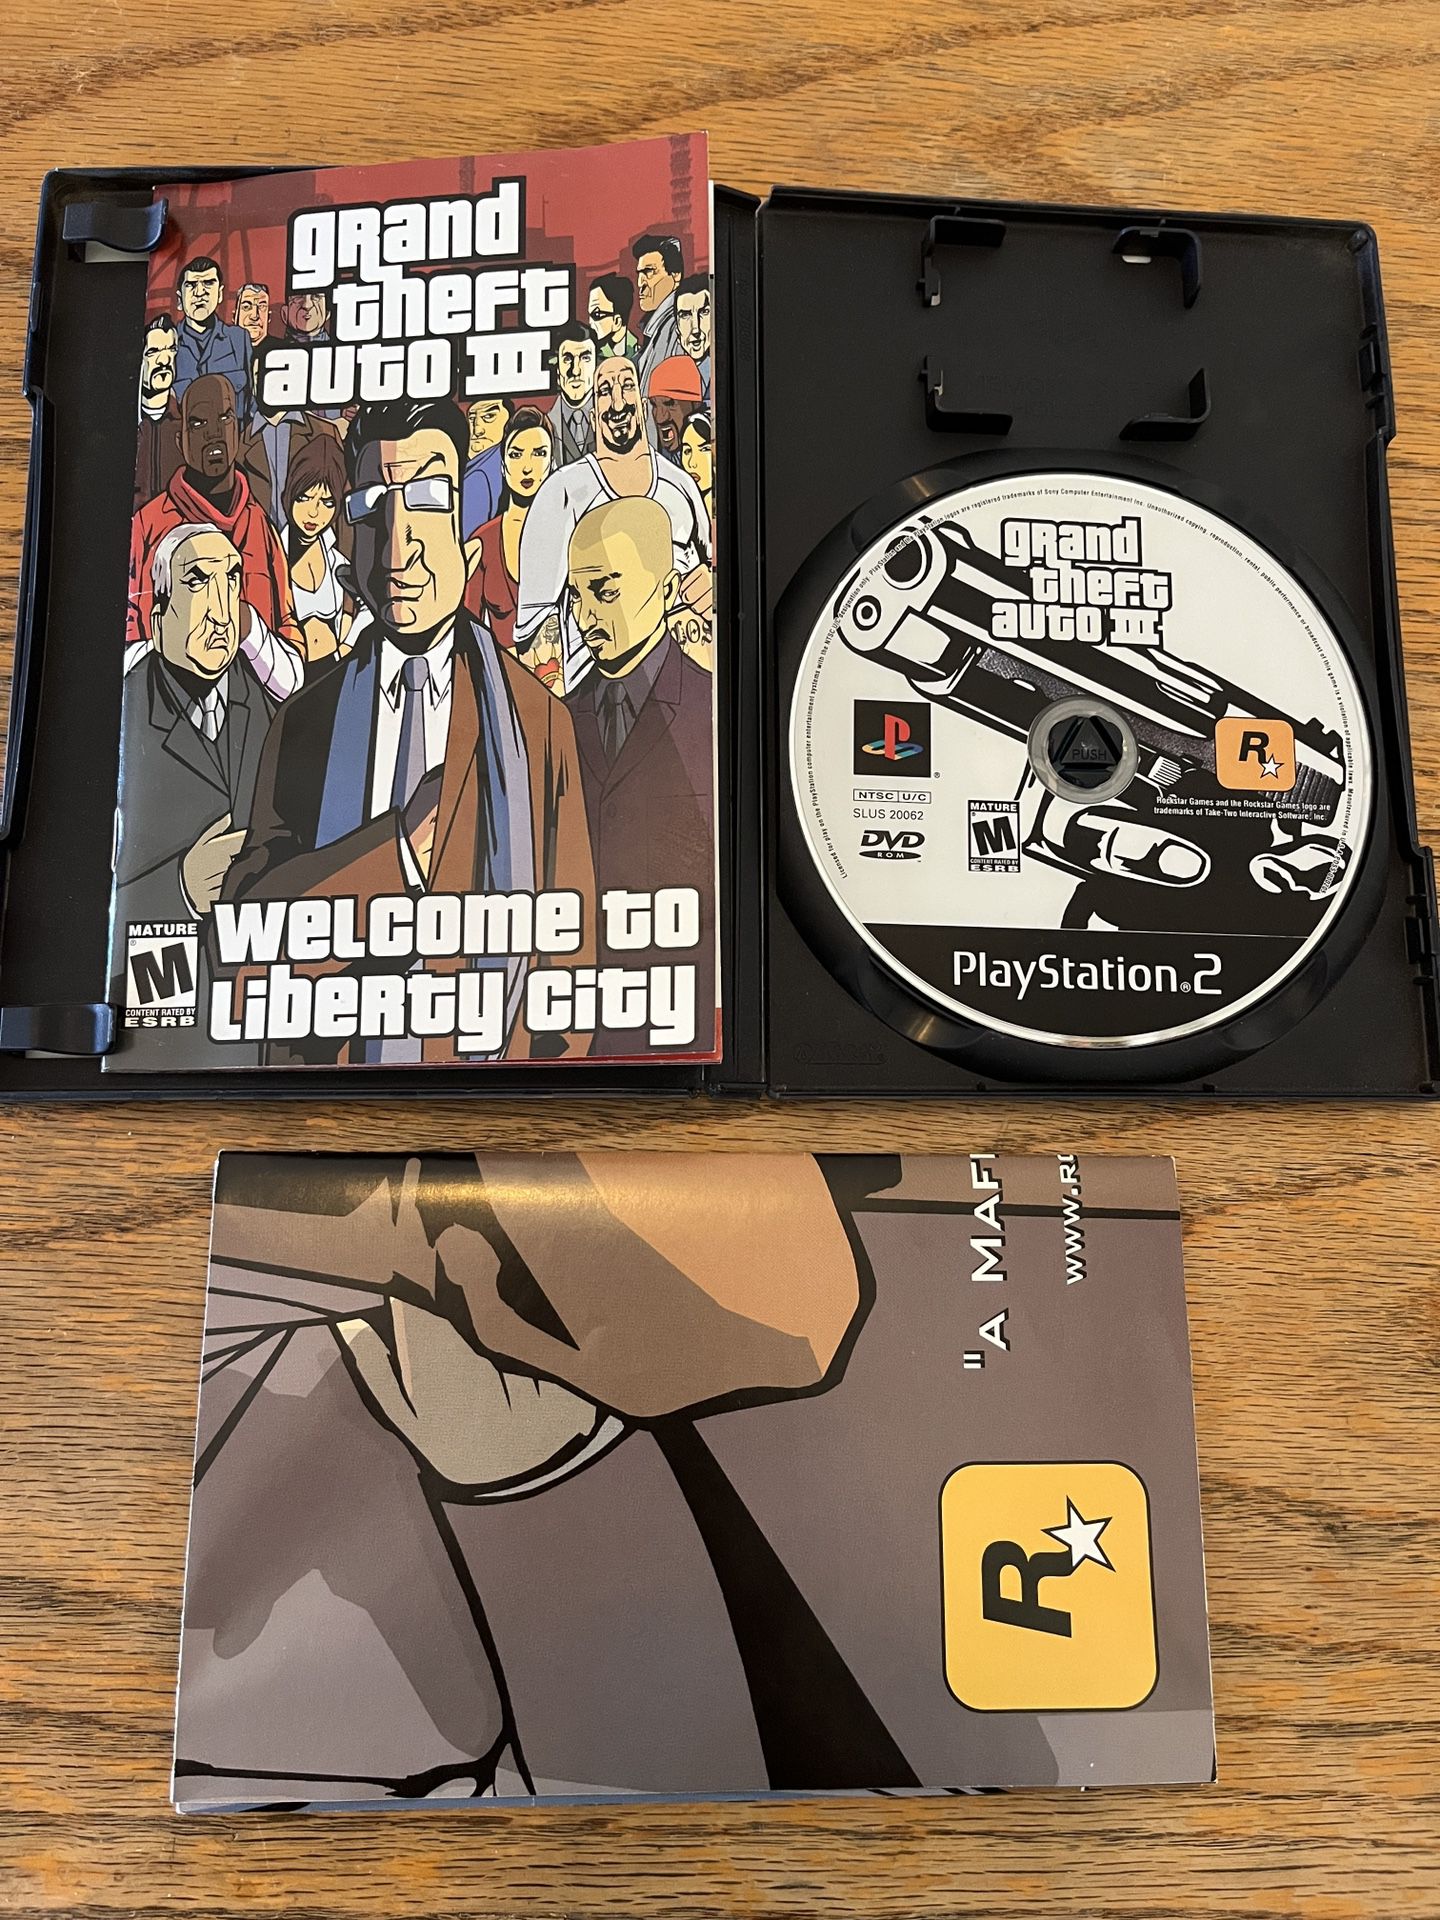 Sony PlayStation 2 Grandtheft Auto 3 is complete with CD game